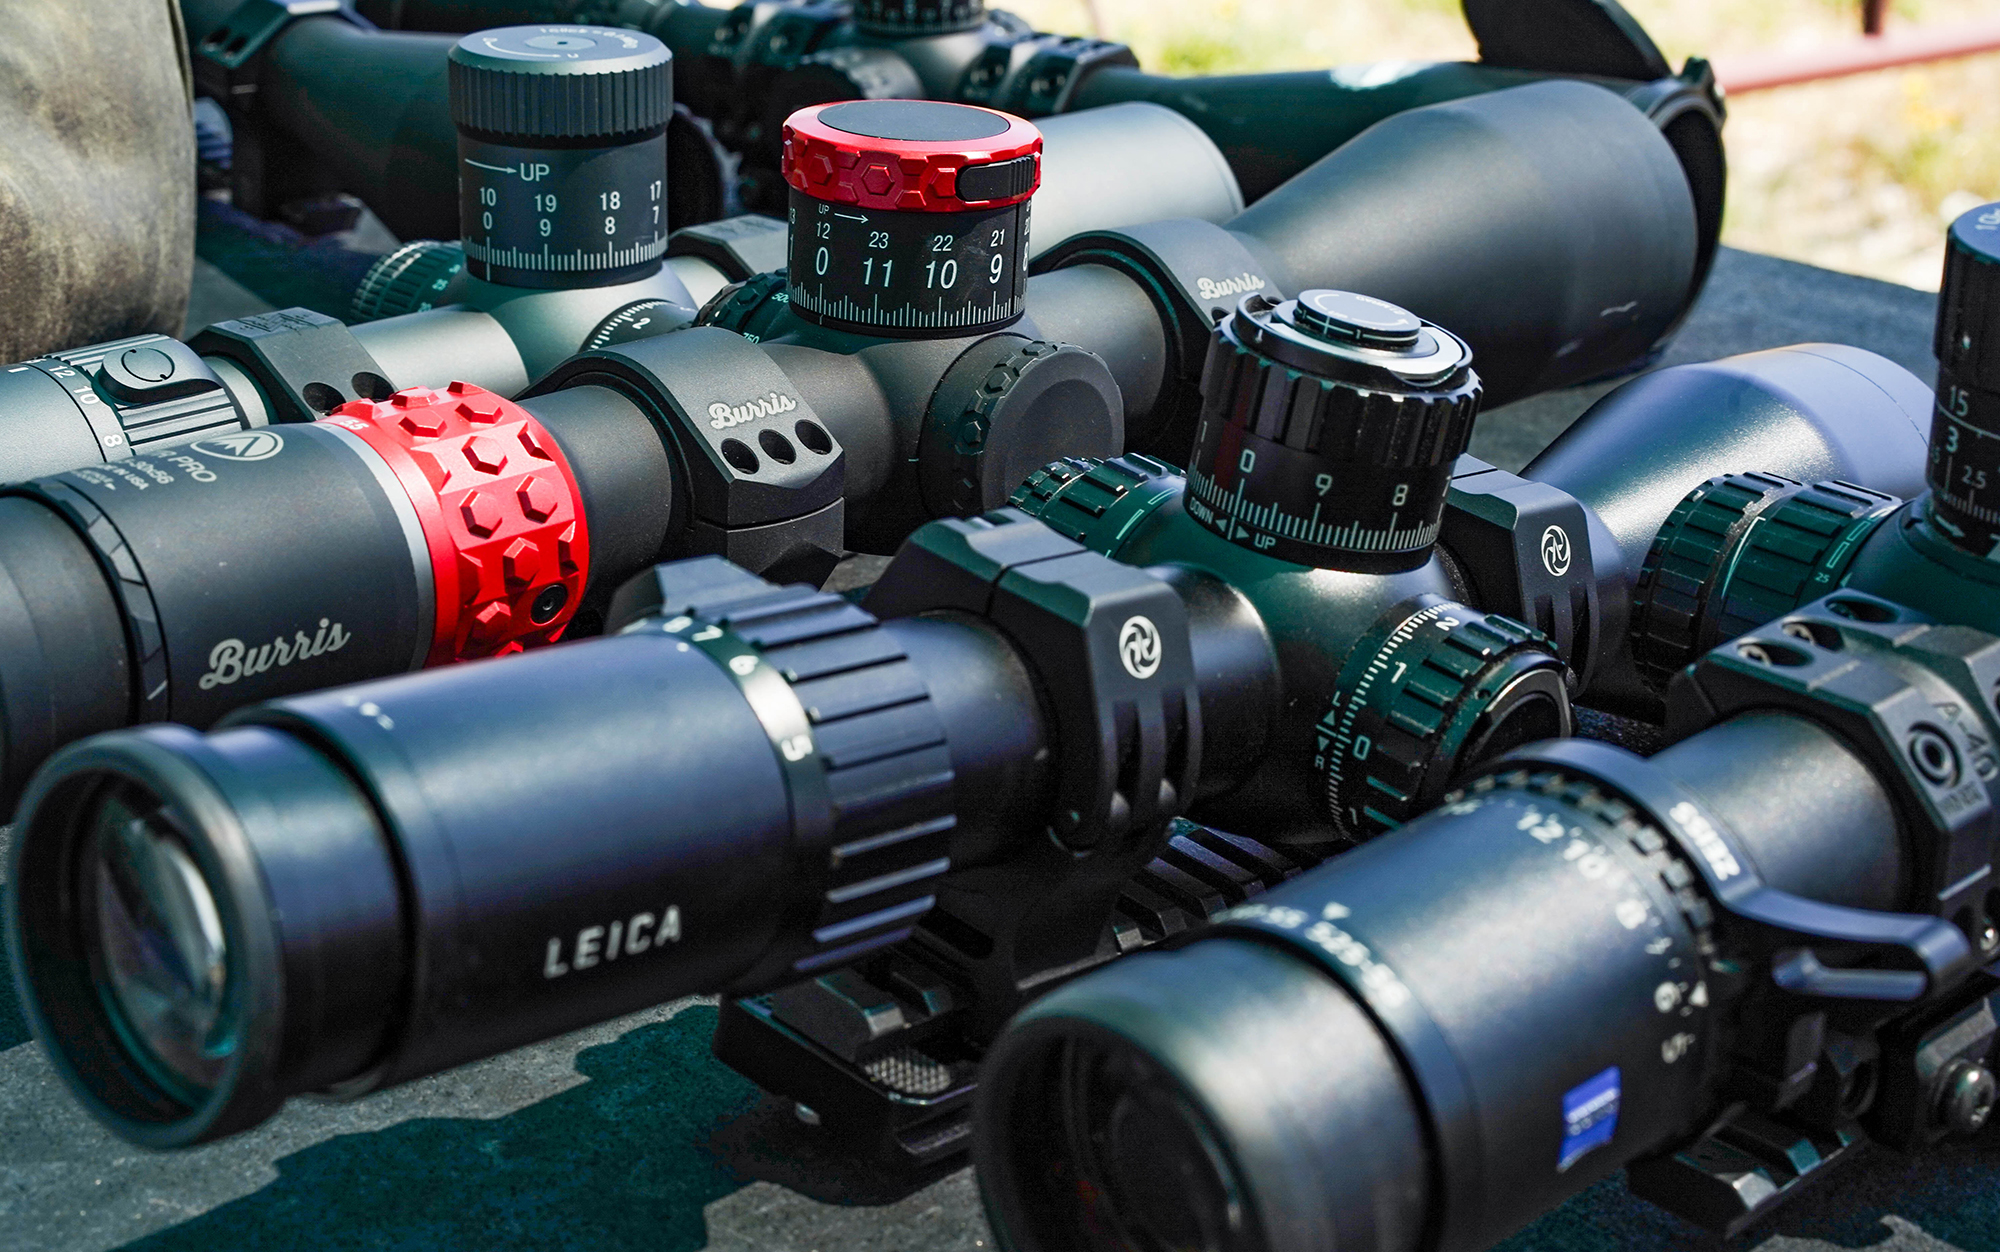 Leica and Burris long range rifle scopes sit in a line.